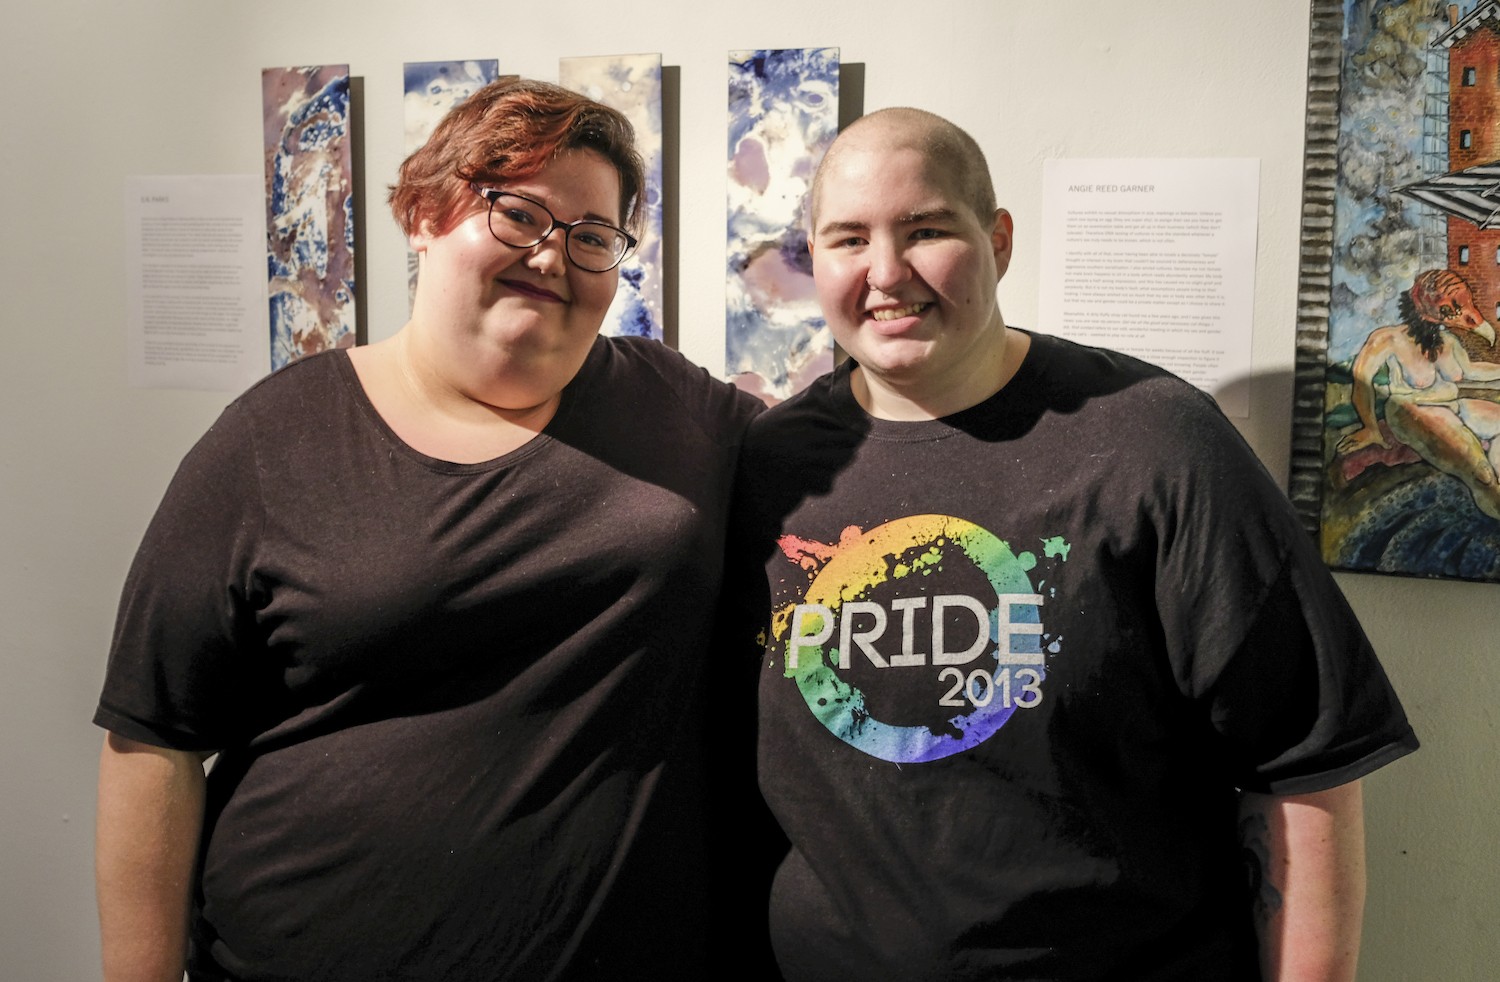 S.N. Parks (left) stands beside their partner MC Lampe (right) at the Queer Voices 2017 art exhibit. Not only is Parks one of the fourteen artists in the exhibit, they are also one of the curators of the show.